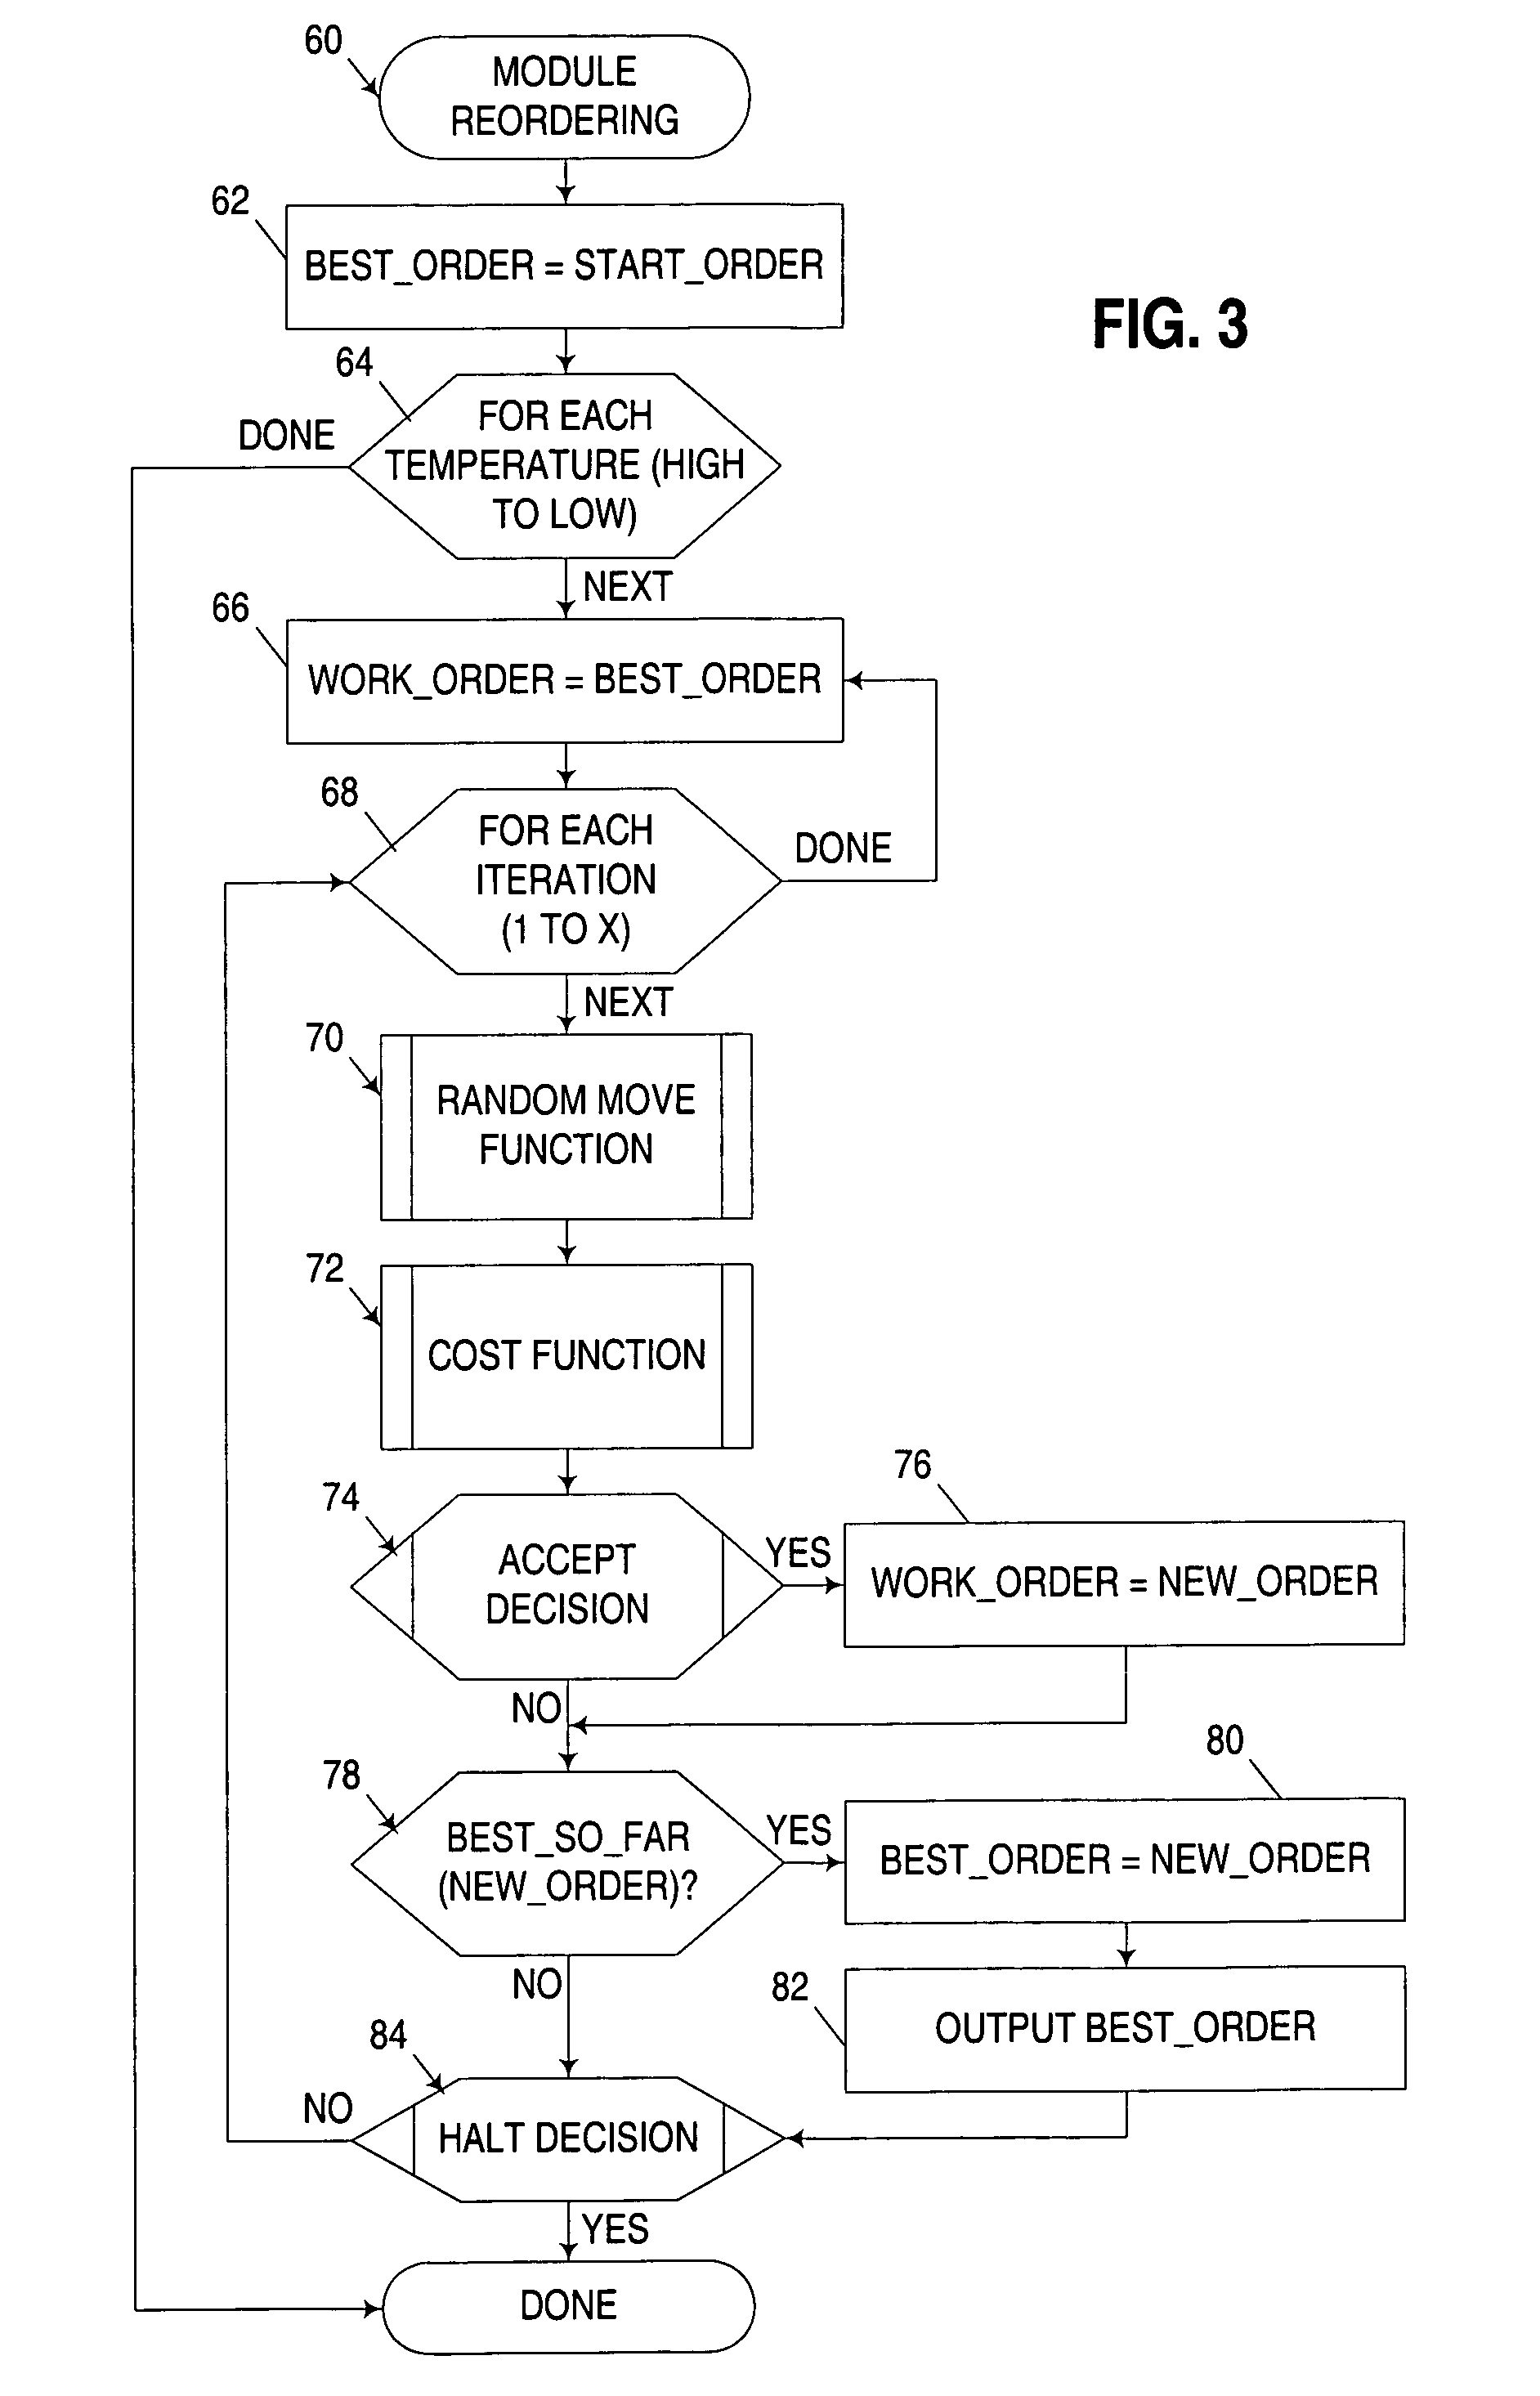 Ordering of high use program code segments using simulated annealing